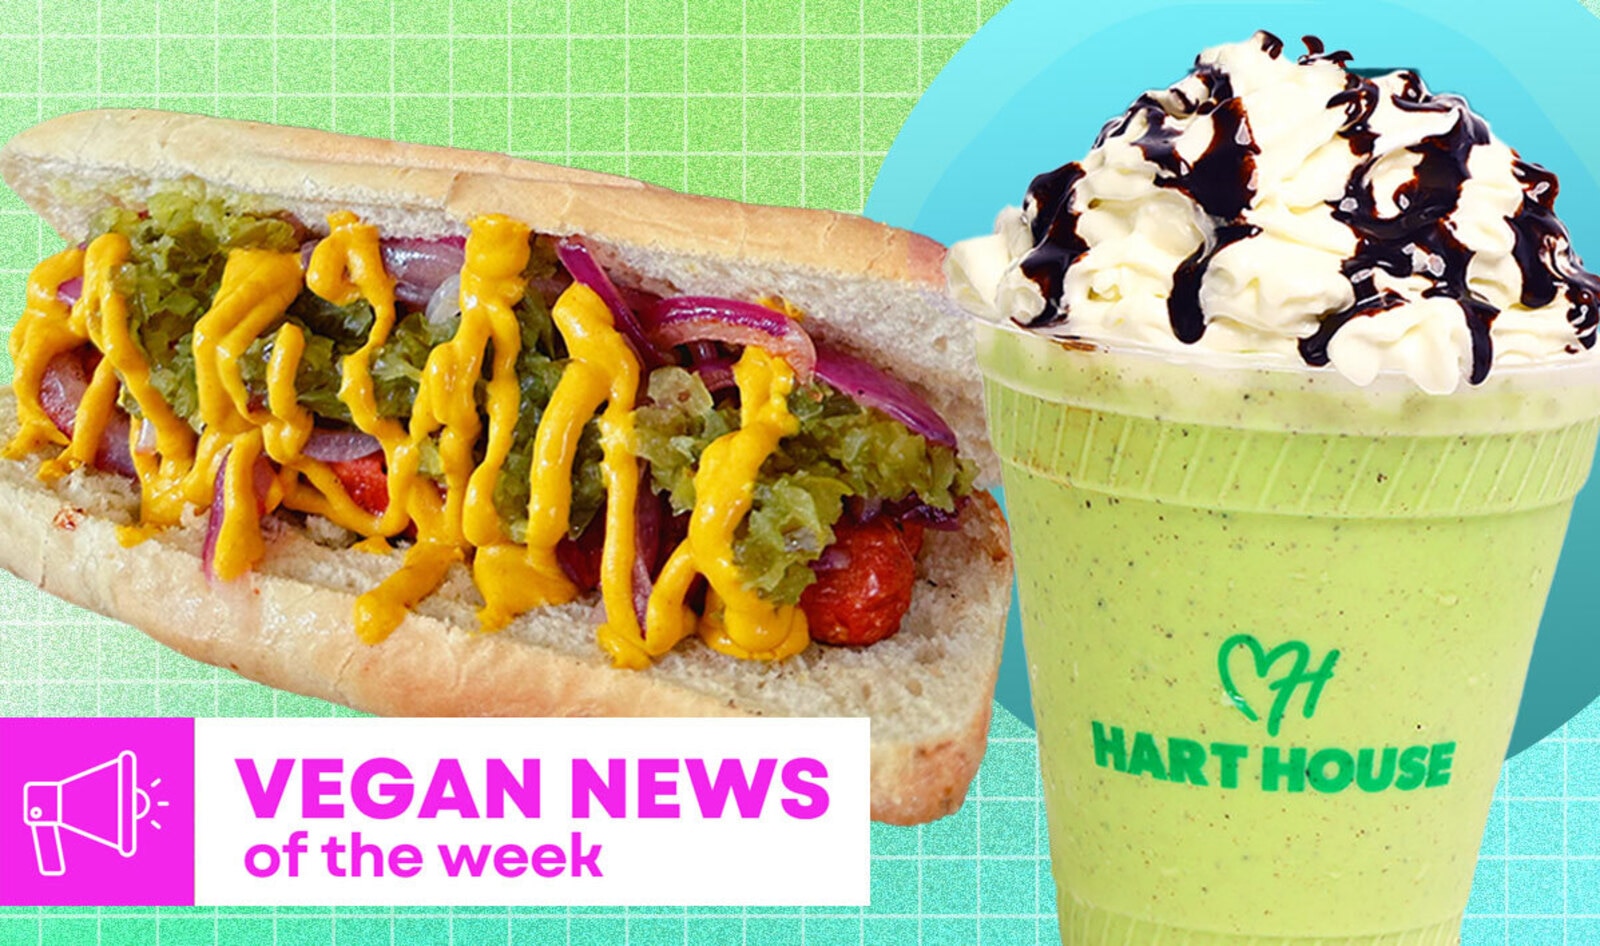 Vegan Food News of the Week: Hart House Party Shake, Better Chicago Dog, and More